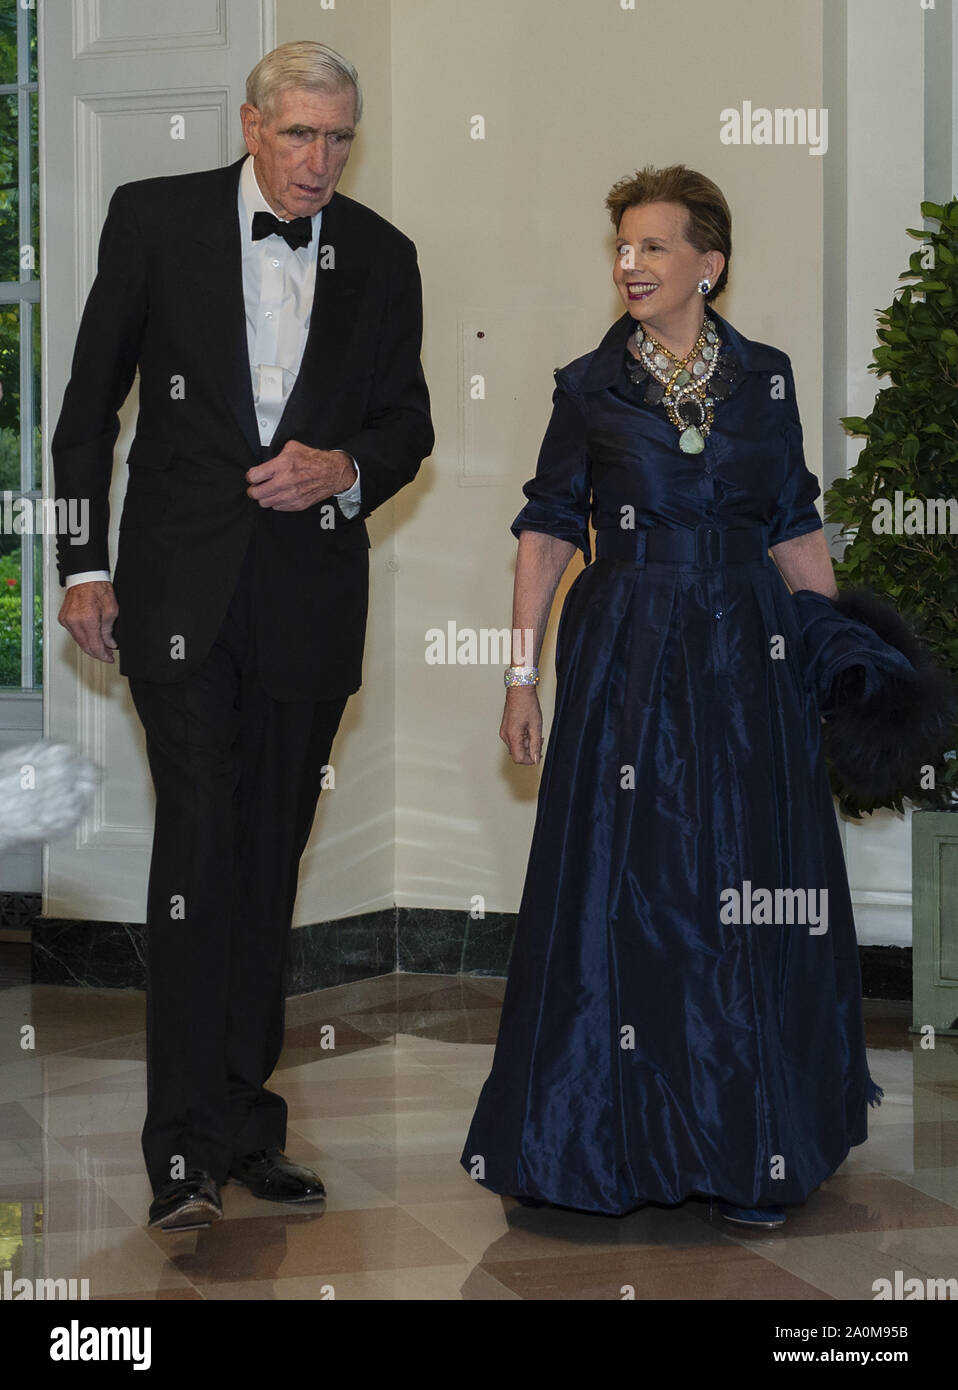 Washington, United States. 20th Sep, 2019. Adrienne Arsht and C. Boyden Gray arrive for the State Dinner hosted by United States President Donald J. Trump and First lady Melania Trump in honor of Prime Minister Scott Morrison of Australia and his wife, Jenny Morrison, at the White House in Washington, DC on Friday, September 20, 2019. Photo by Ron Sachs/UPI Credit: UPI/Alamy Live News Stock Photo